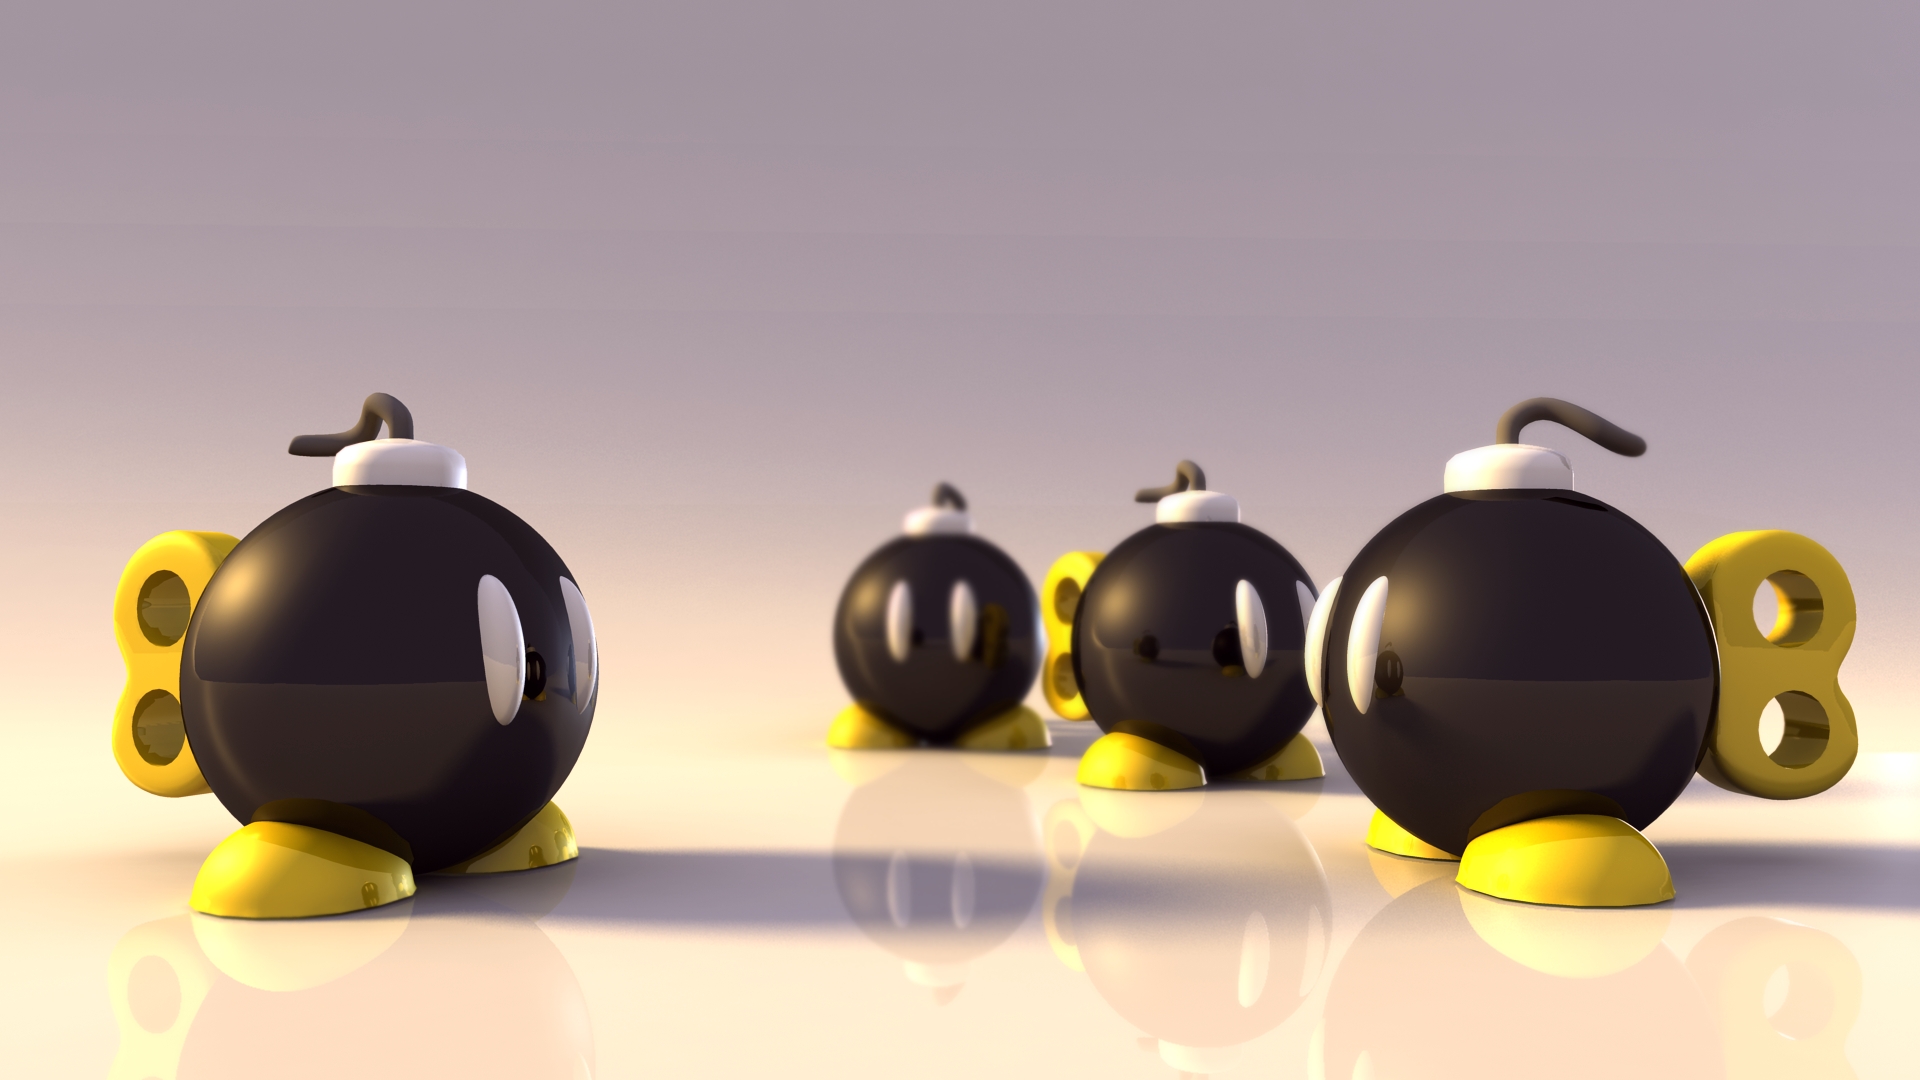 Bob Omb HD Wallpaper And Background